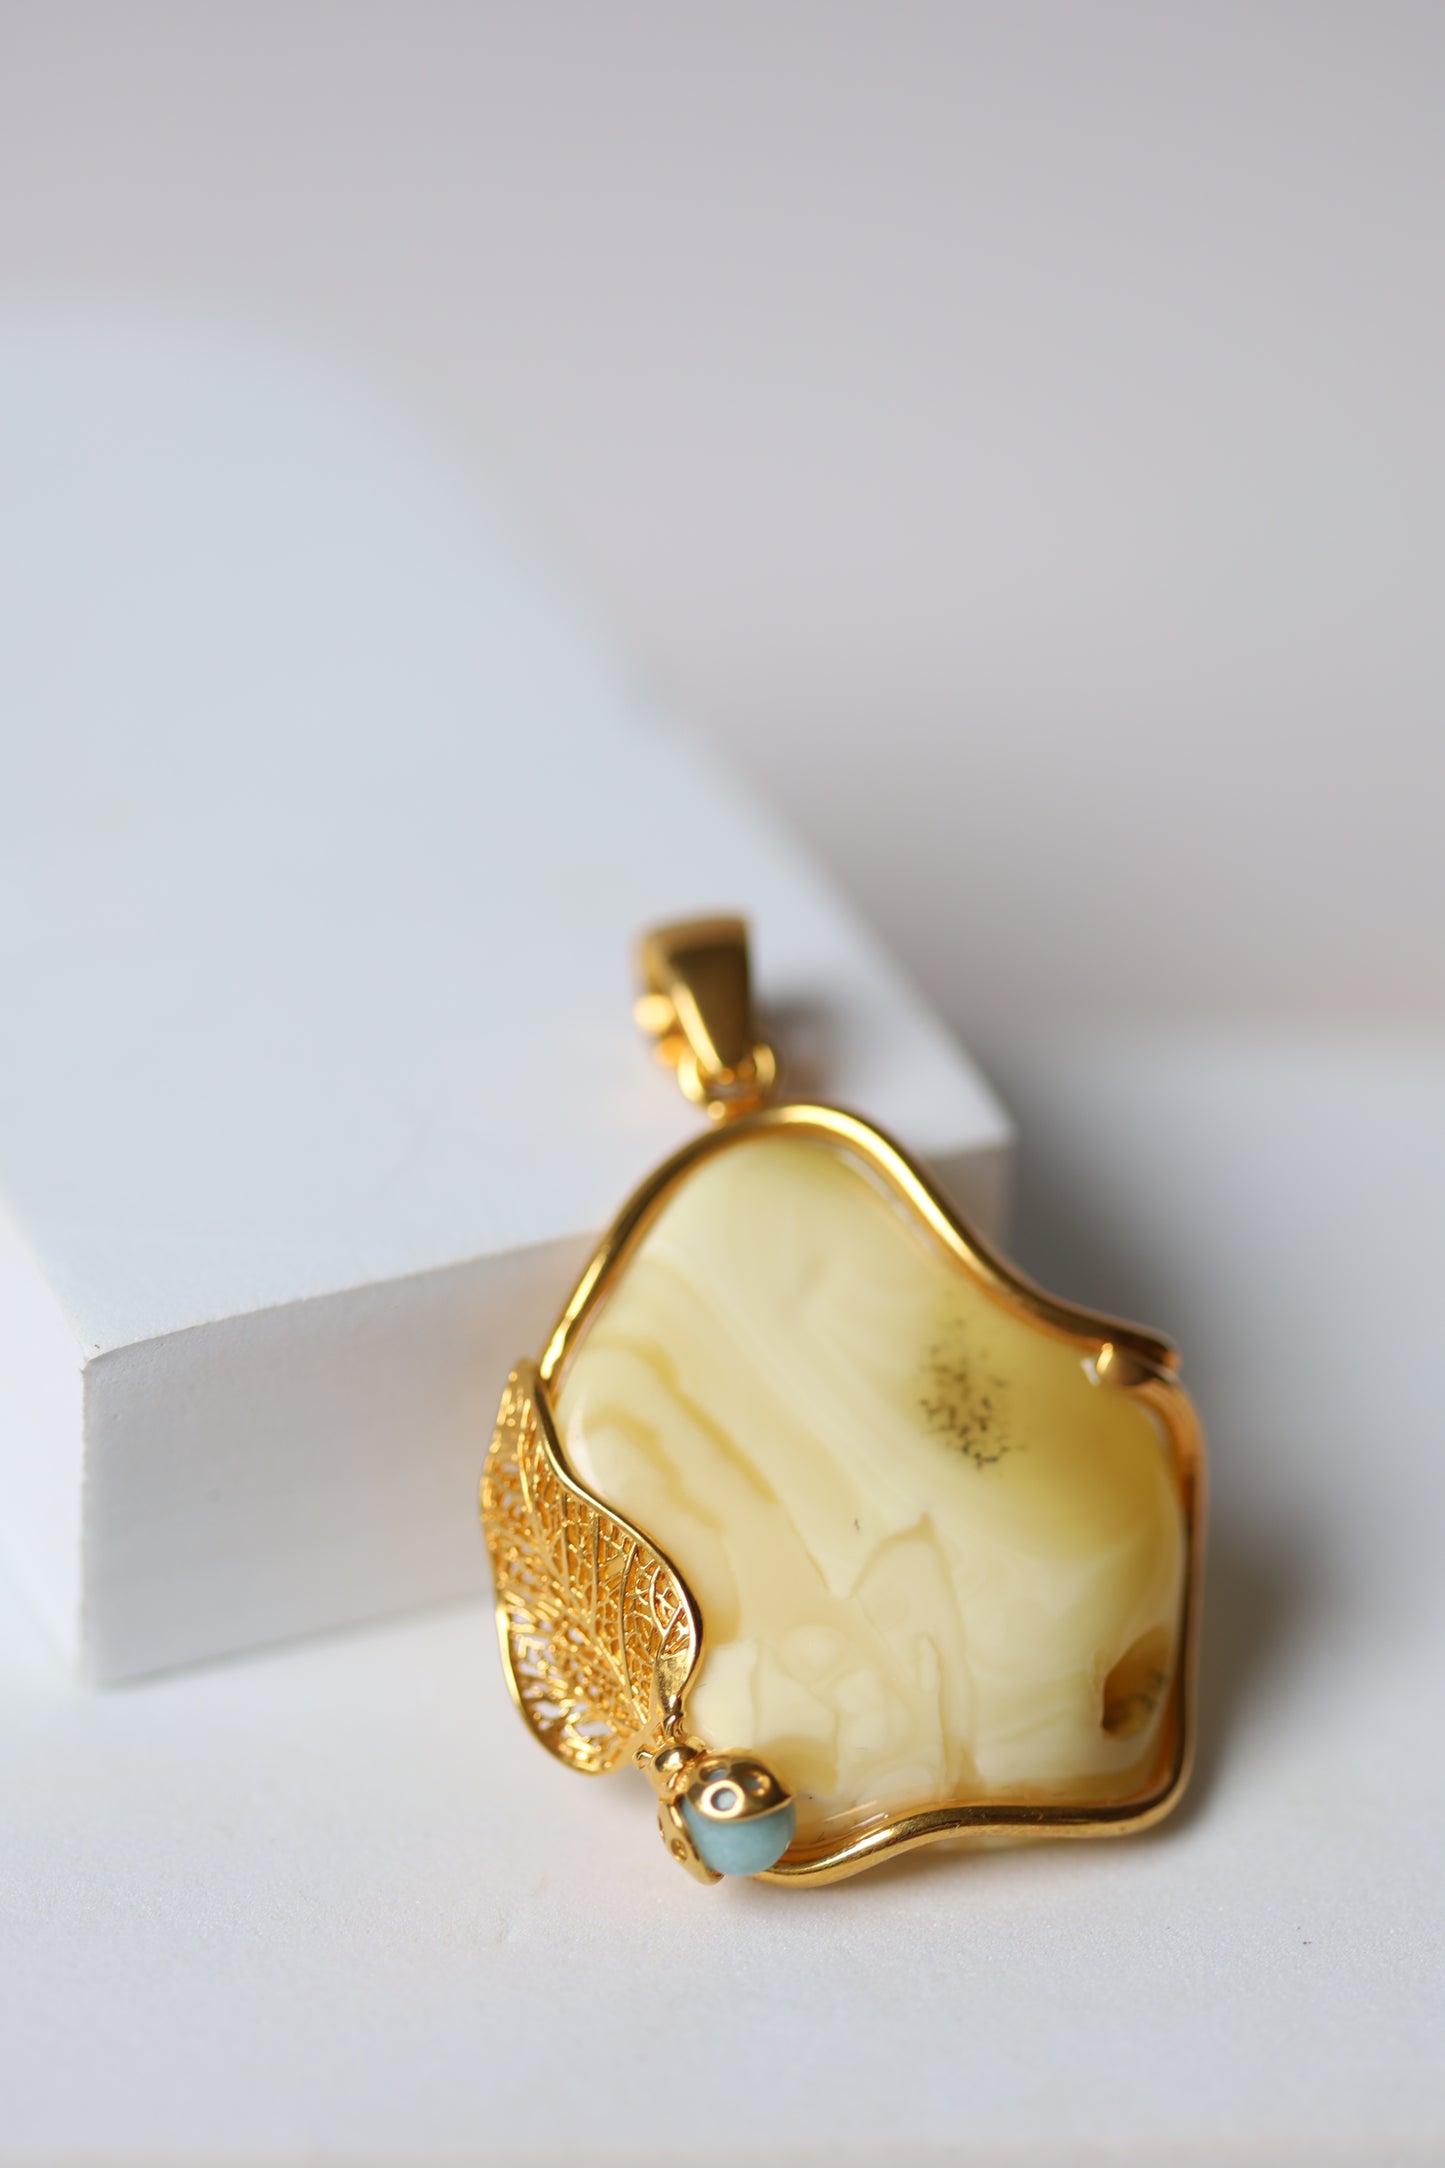 Unique Natural Royal White / Honey Amber Handmade Pendant in Gold Plated Silver with Larimar